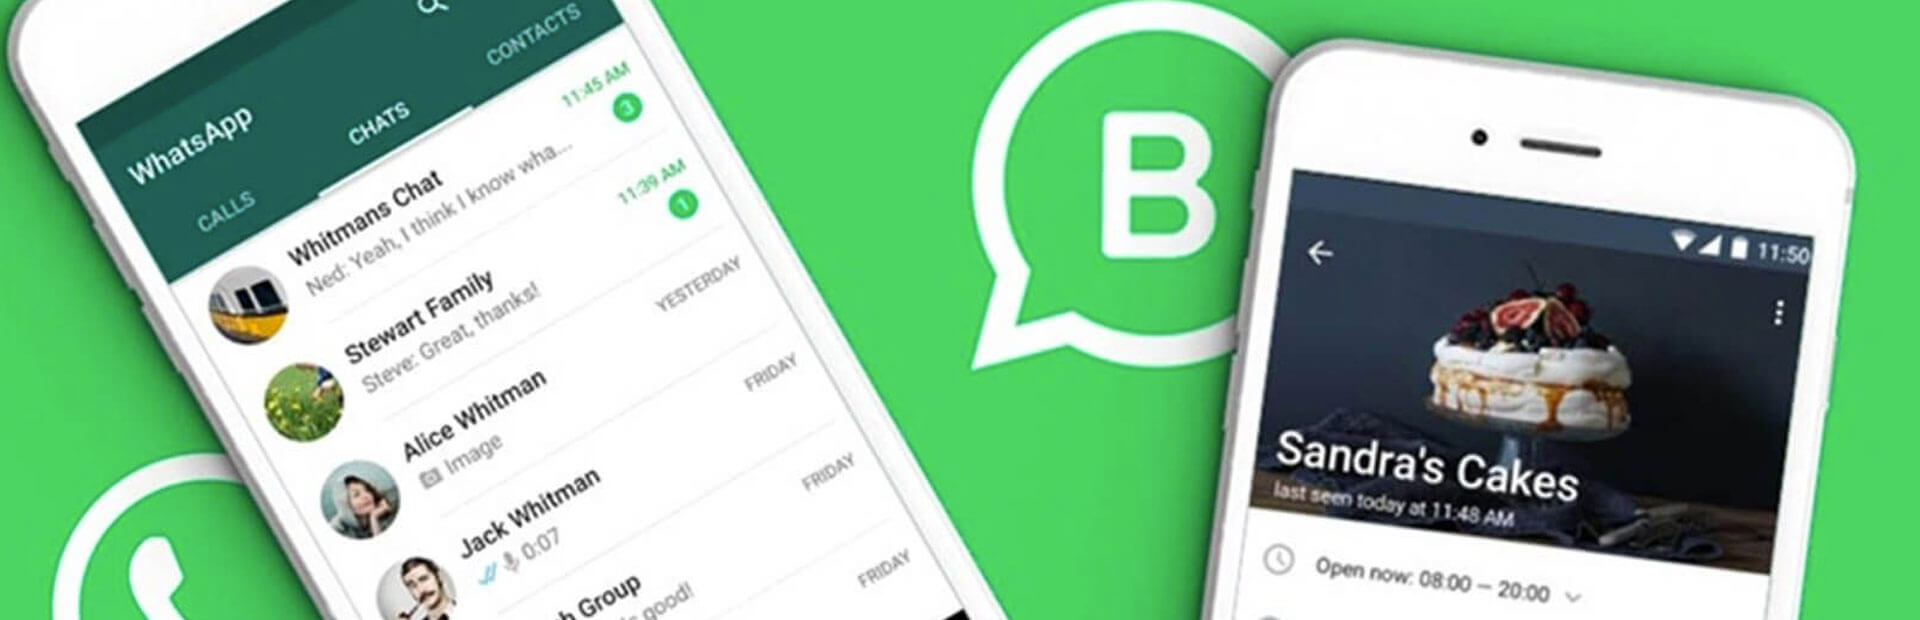 WhatsApp Marketing: The new way to reach your customers!